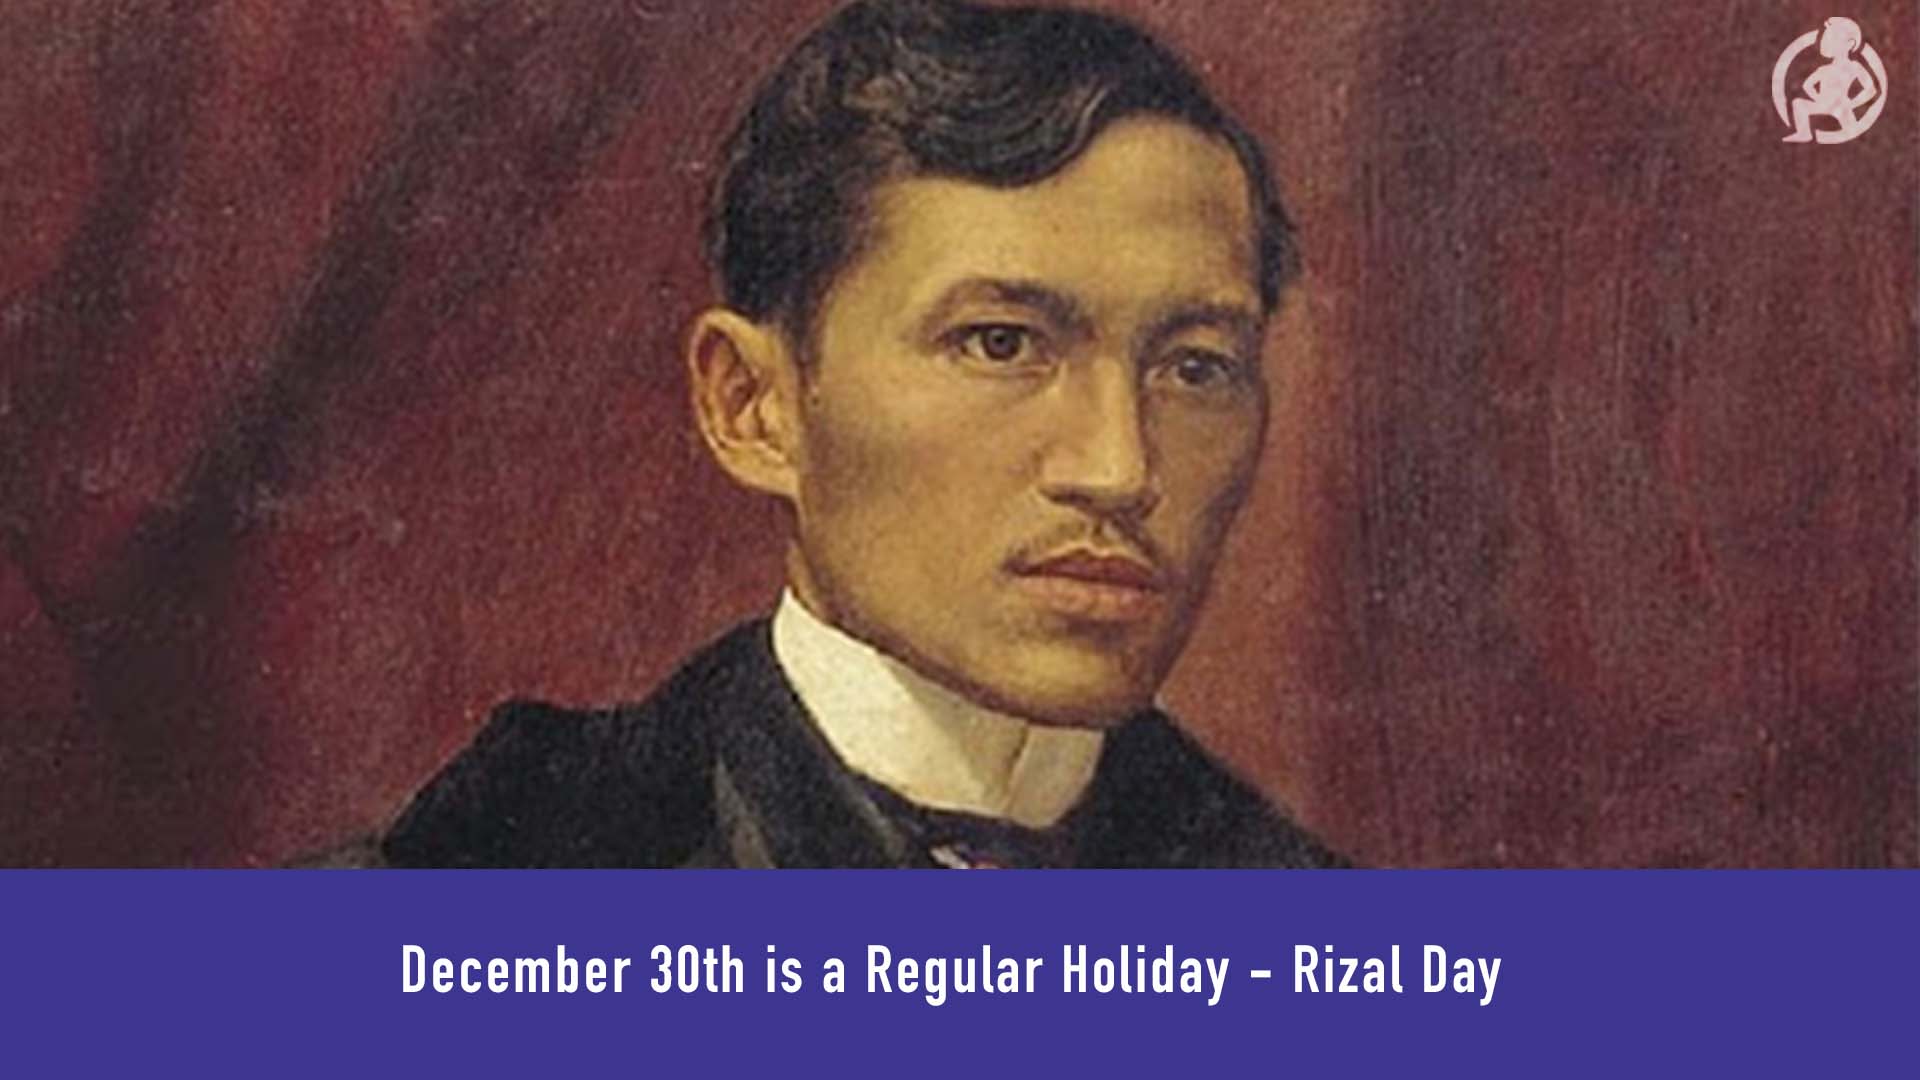 December 30th is a Regular Holiday - Rizal Day